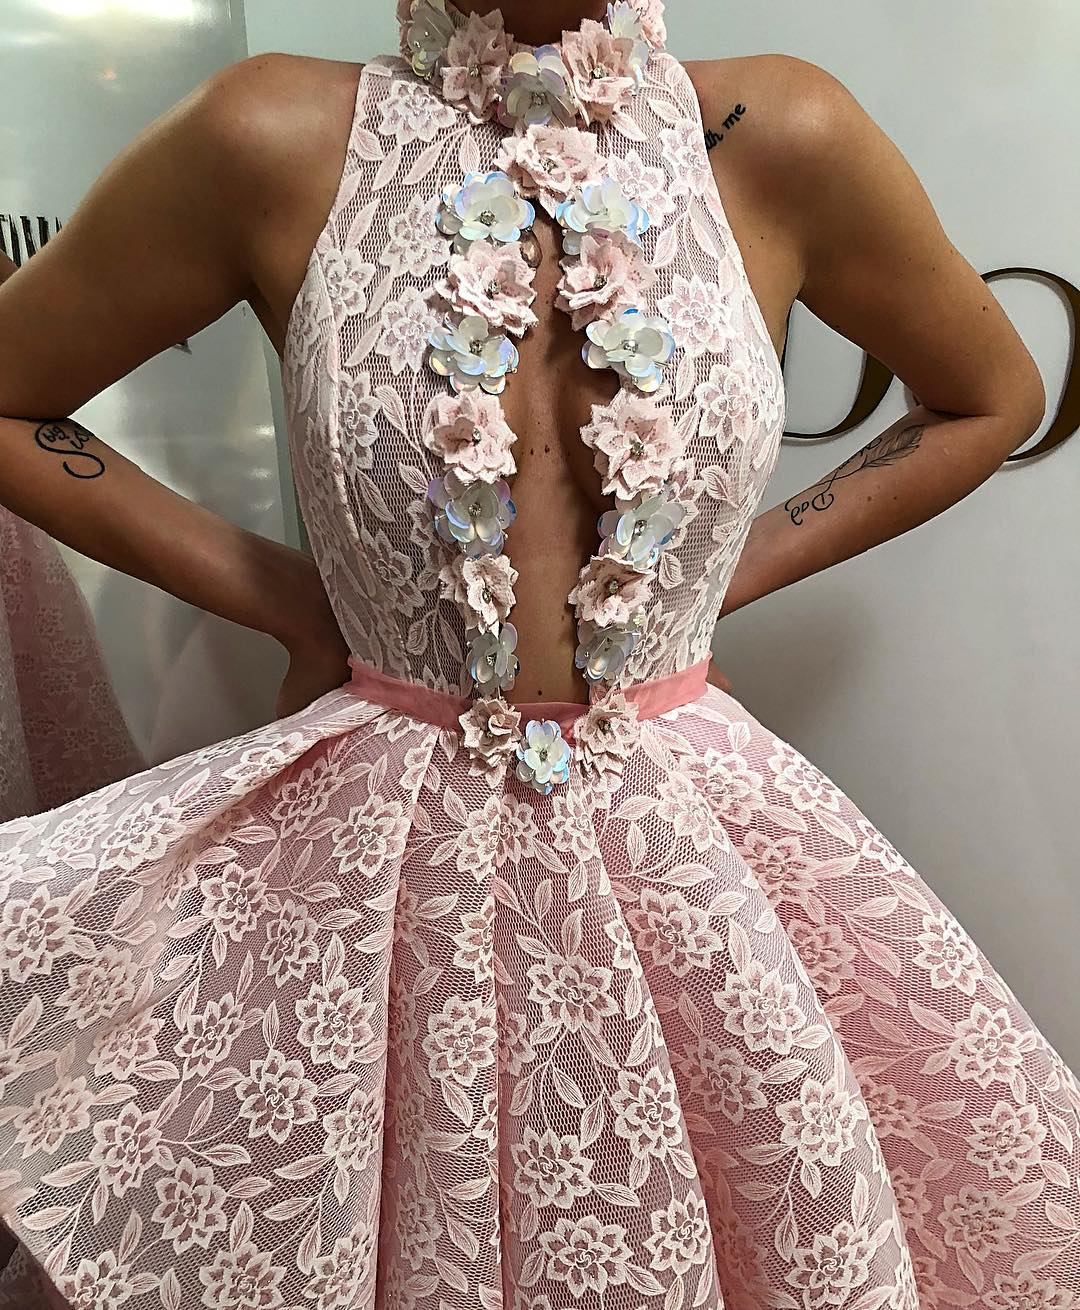 gowns for women | gowns for girls | gowns for sale | gowns for weddings | gowns for prom | gowns dresses | gowns beautiful gowns | gowns images | gowns design | gowns fashion show | gowns pink floral 